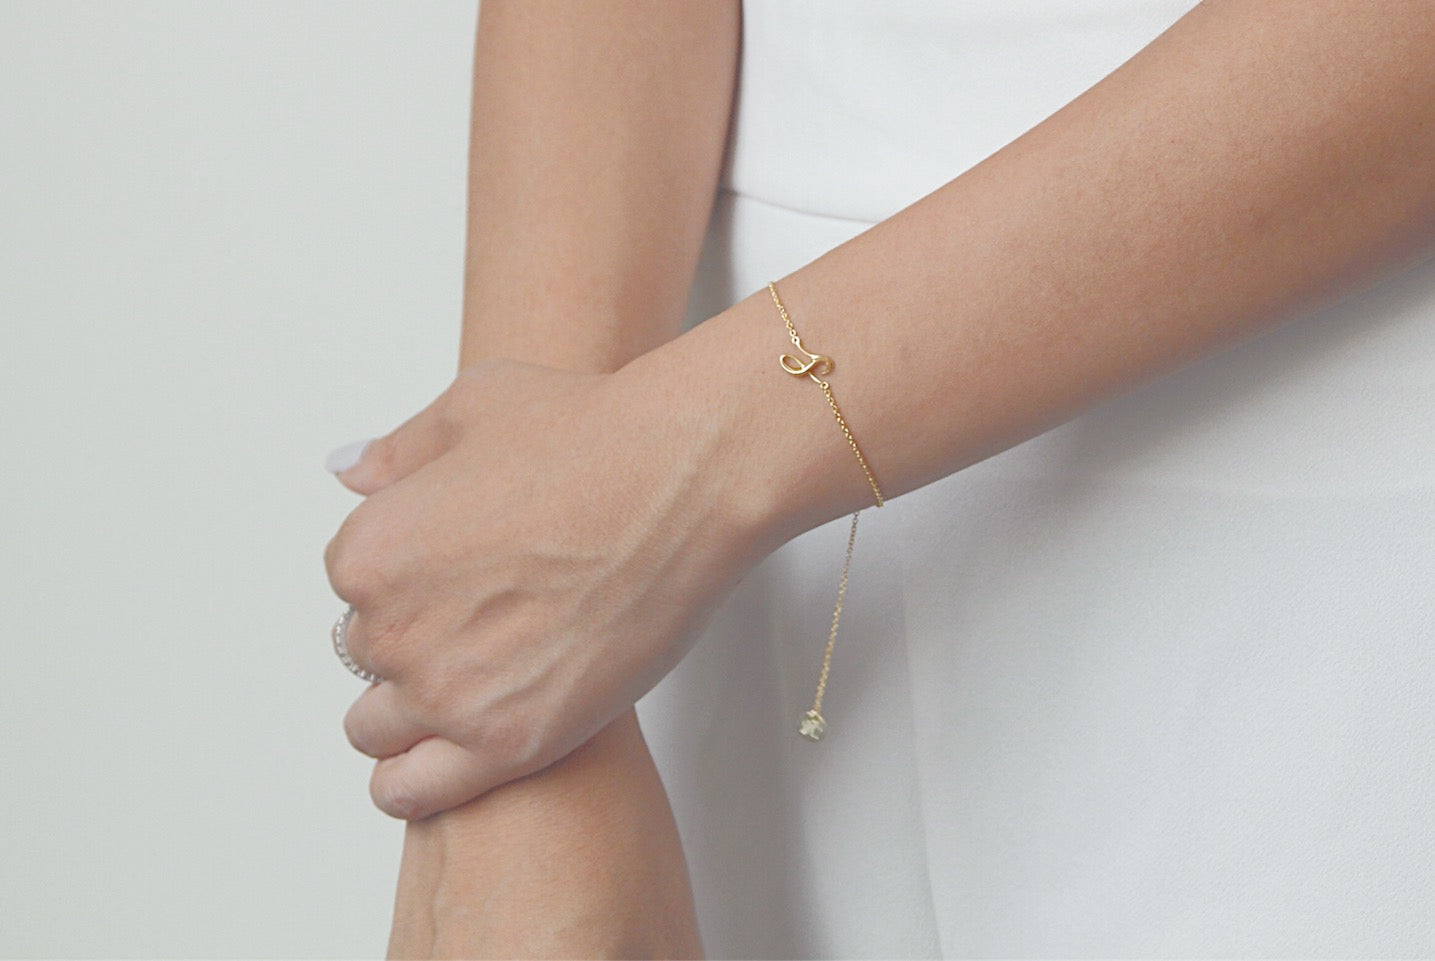 The Love Collect - "S" Bracelet